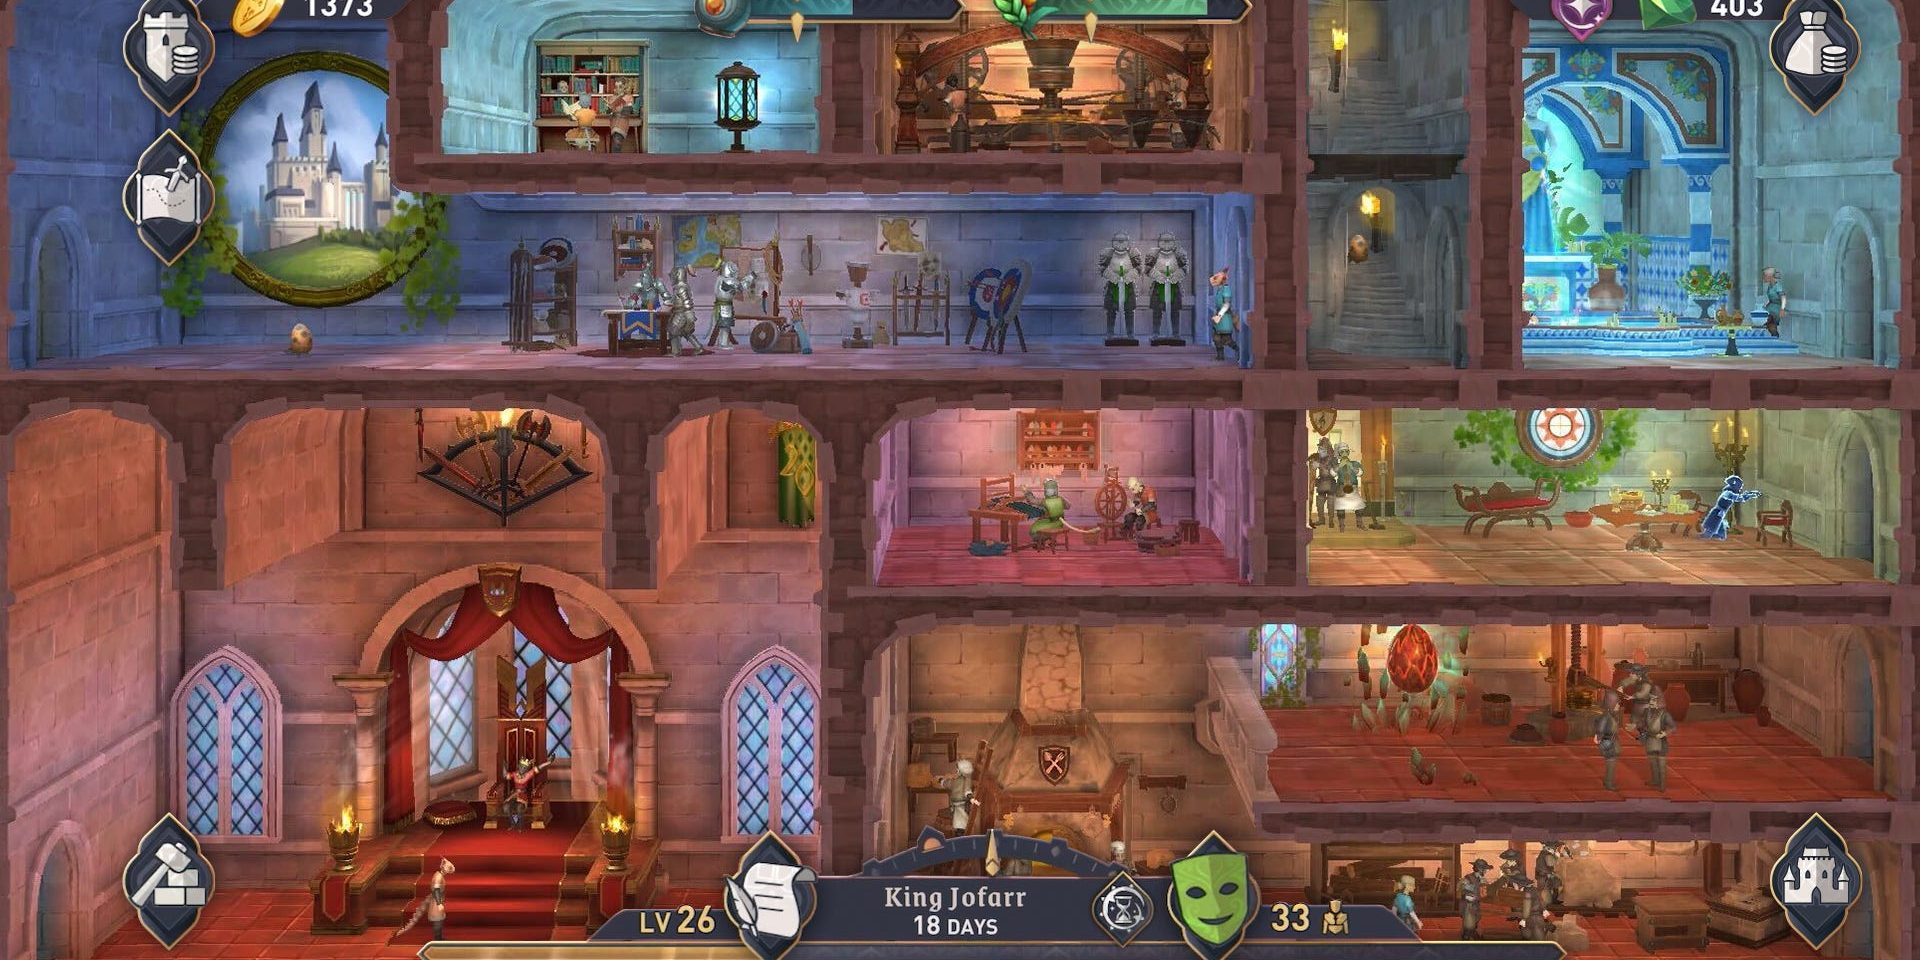 Elder Scrolls just got a Fallout Shelter-style mobile game on Google Play